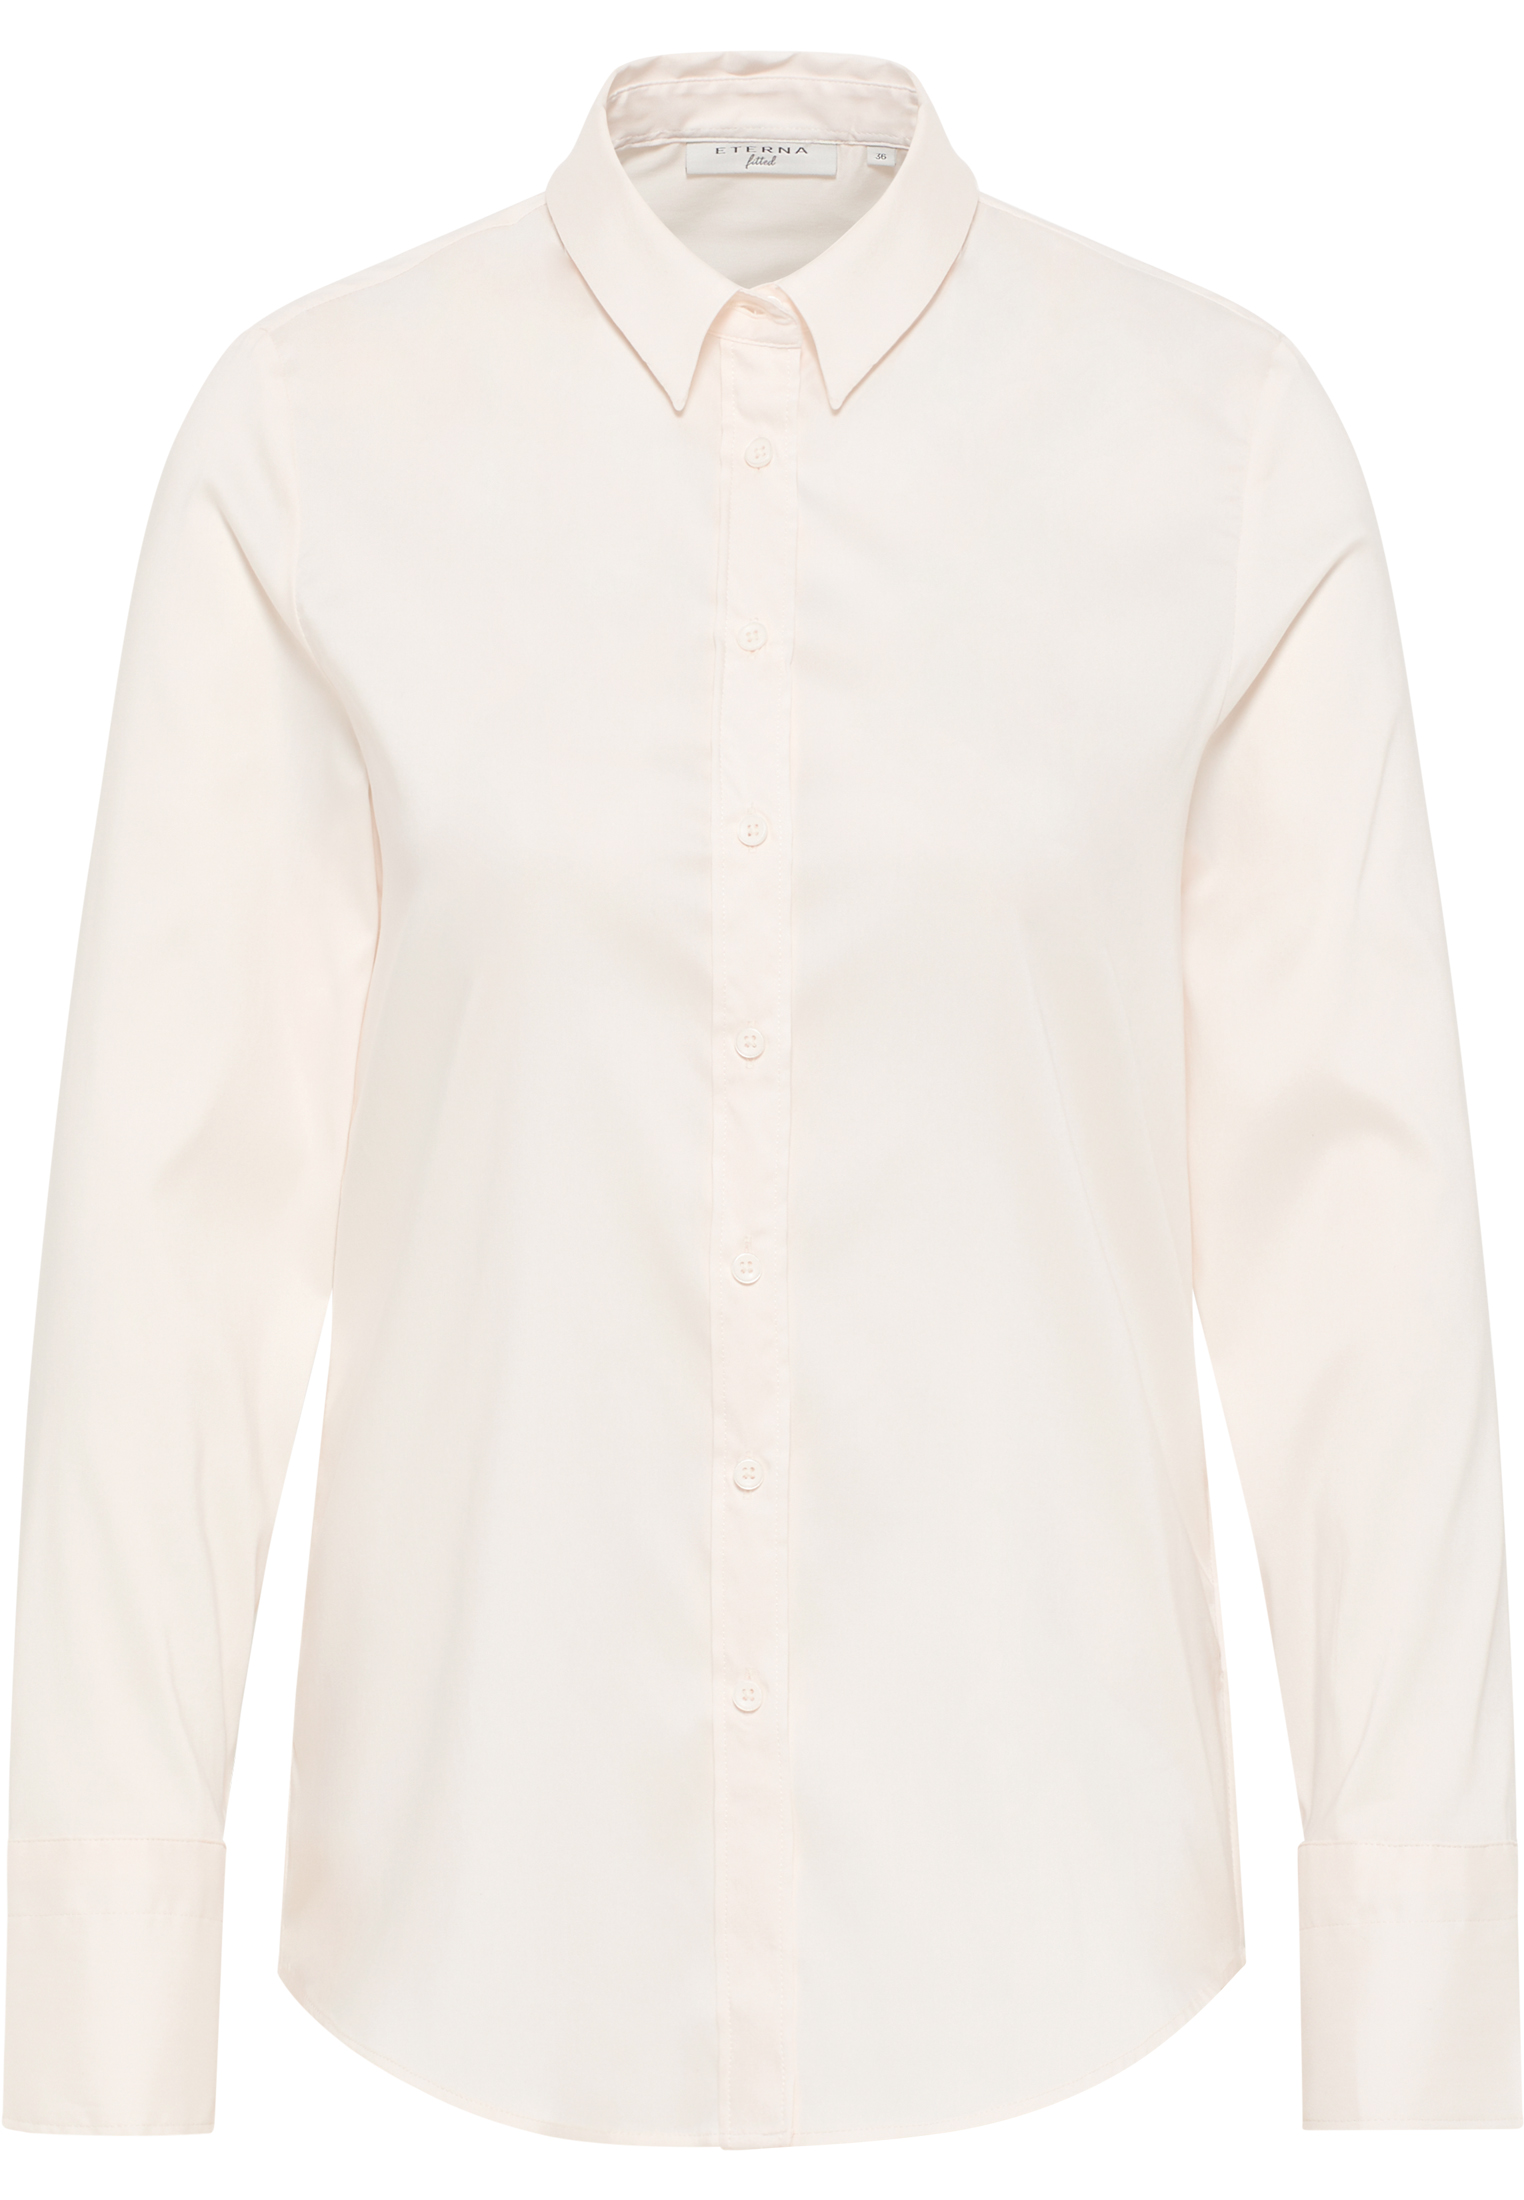 Performance Shirt Langarm | 2BL00441-00-02-38-1/1 | off-white in unifarben Bluse | off-white 38 